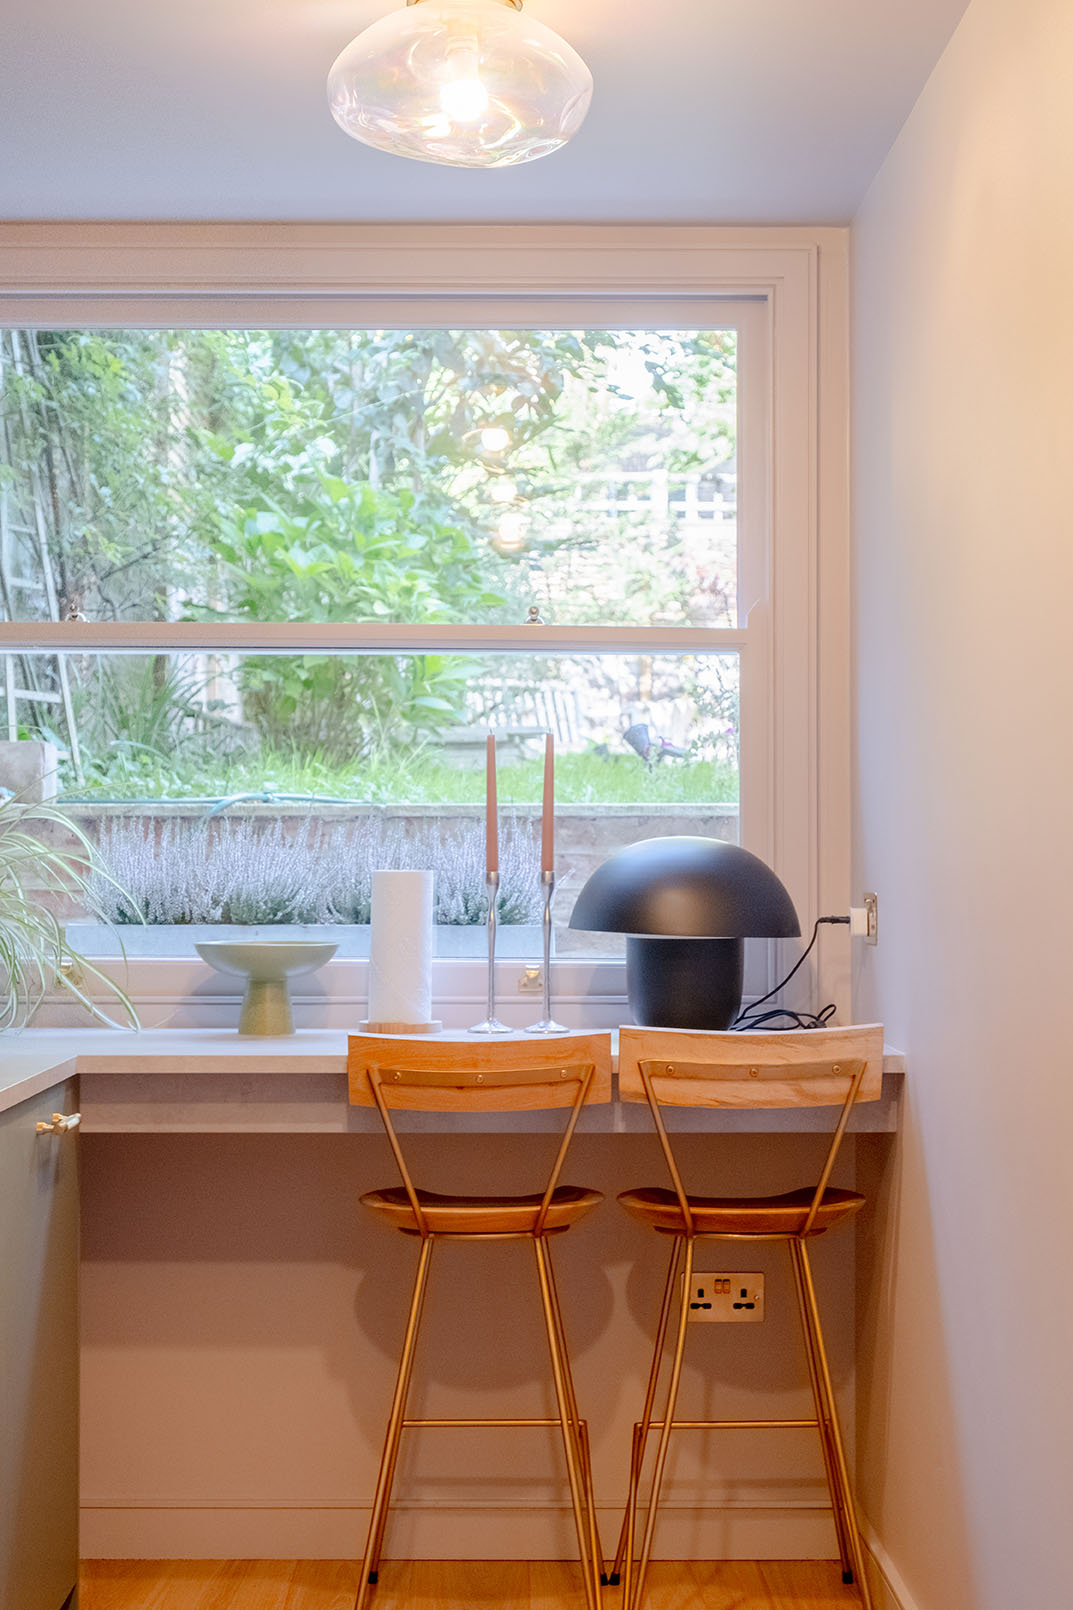 A kitchen detail photograph captured for sales property photography, giving the vibe of the area with high stools in front of a large window looking to a green area.